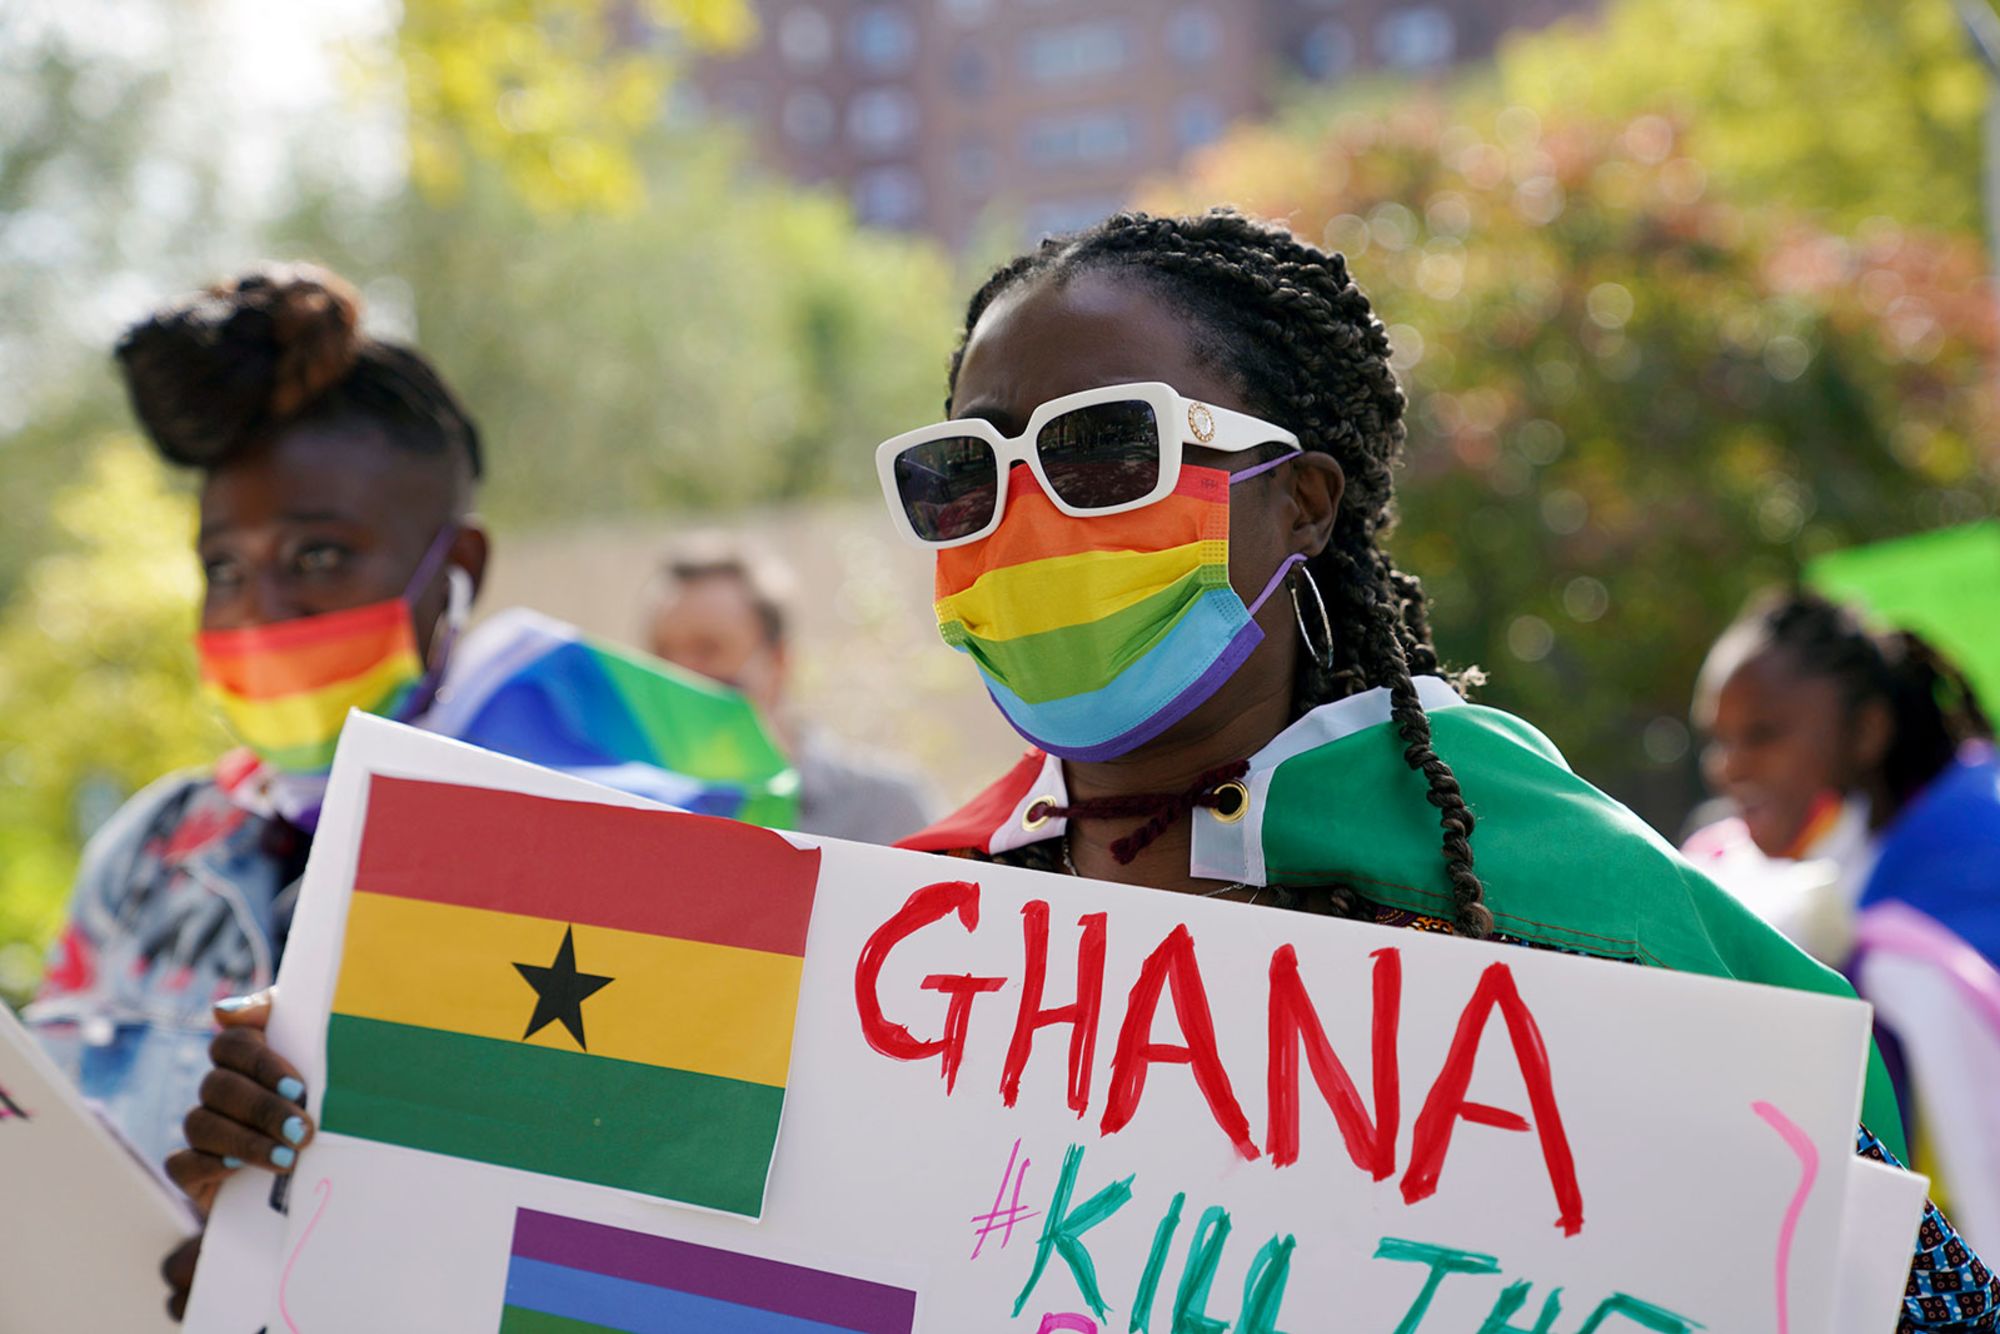 Wilhemina Nyarko attends a rally against a controversial bill being proposed in Ghana's parliament that would make identifying as LGBTQIA or an ally a criminal offense punishable by up to 10 years in prison, in the Harlem neighborhood of New York on Monday, Oct 11, 2021. "It's a scary bill," says Nyarko, who is from Ghana and has lived in New York for thirty years. "I felt I needed to come and support this." (AP Photo/Emily Leshner)